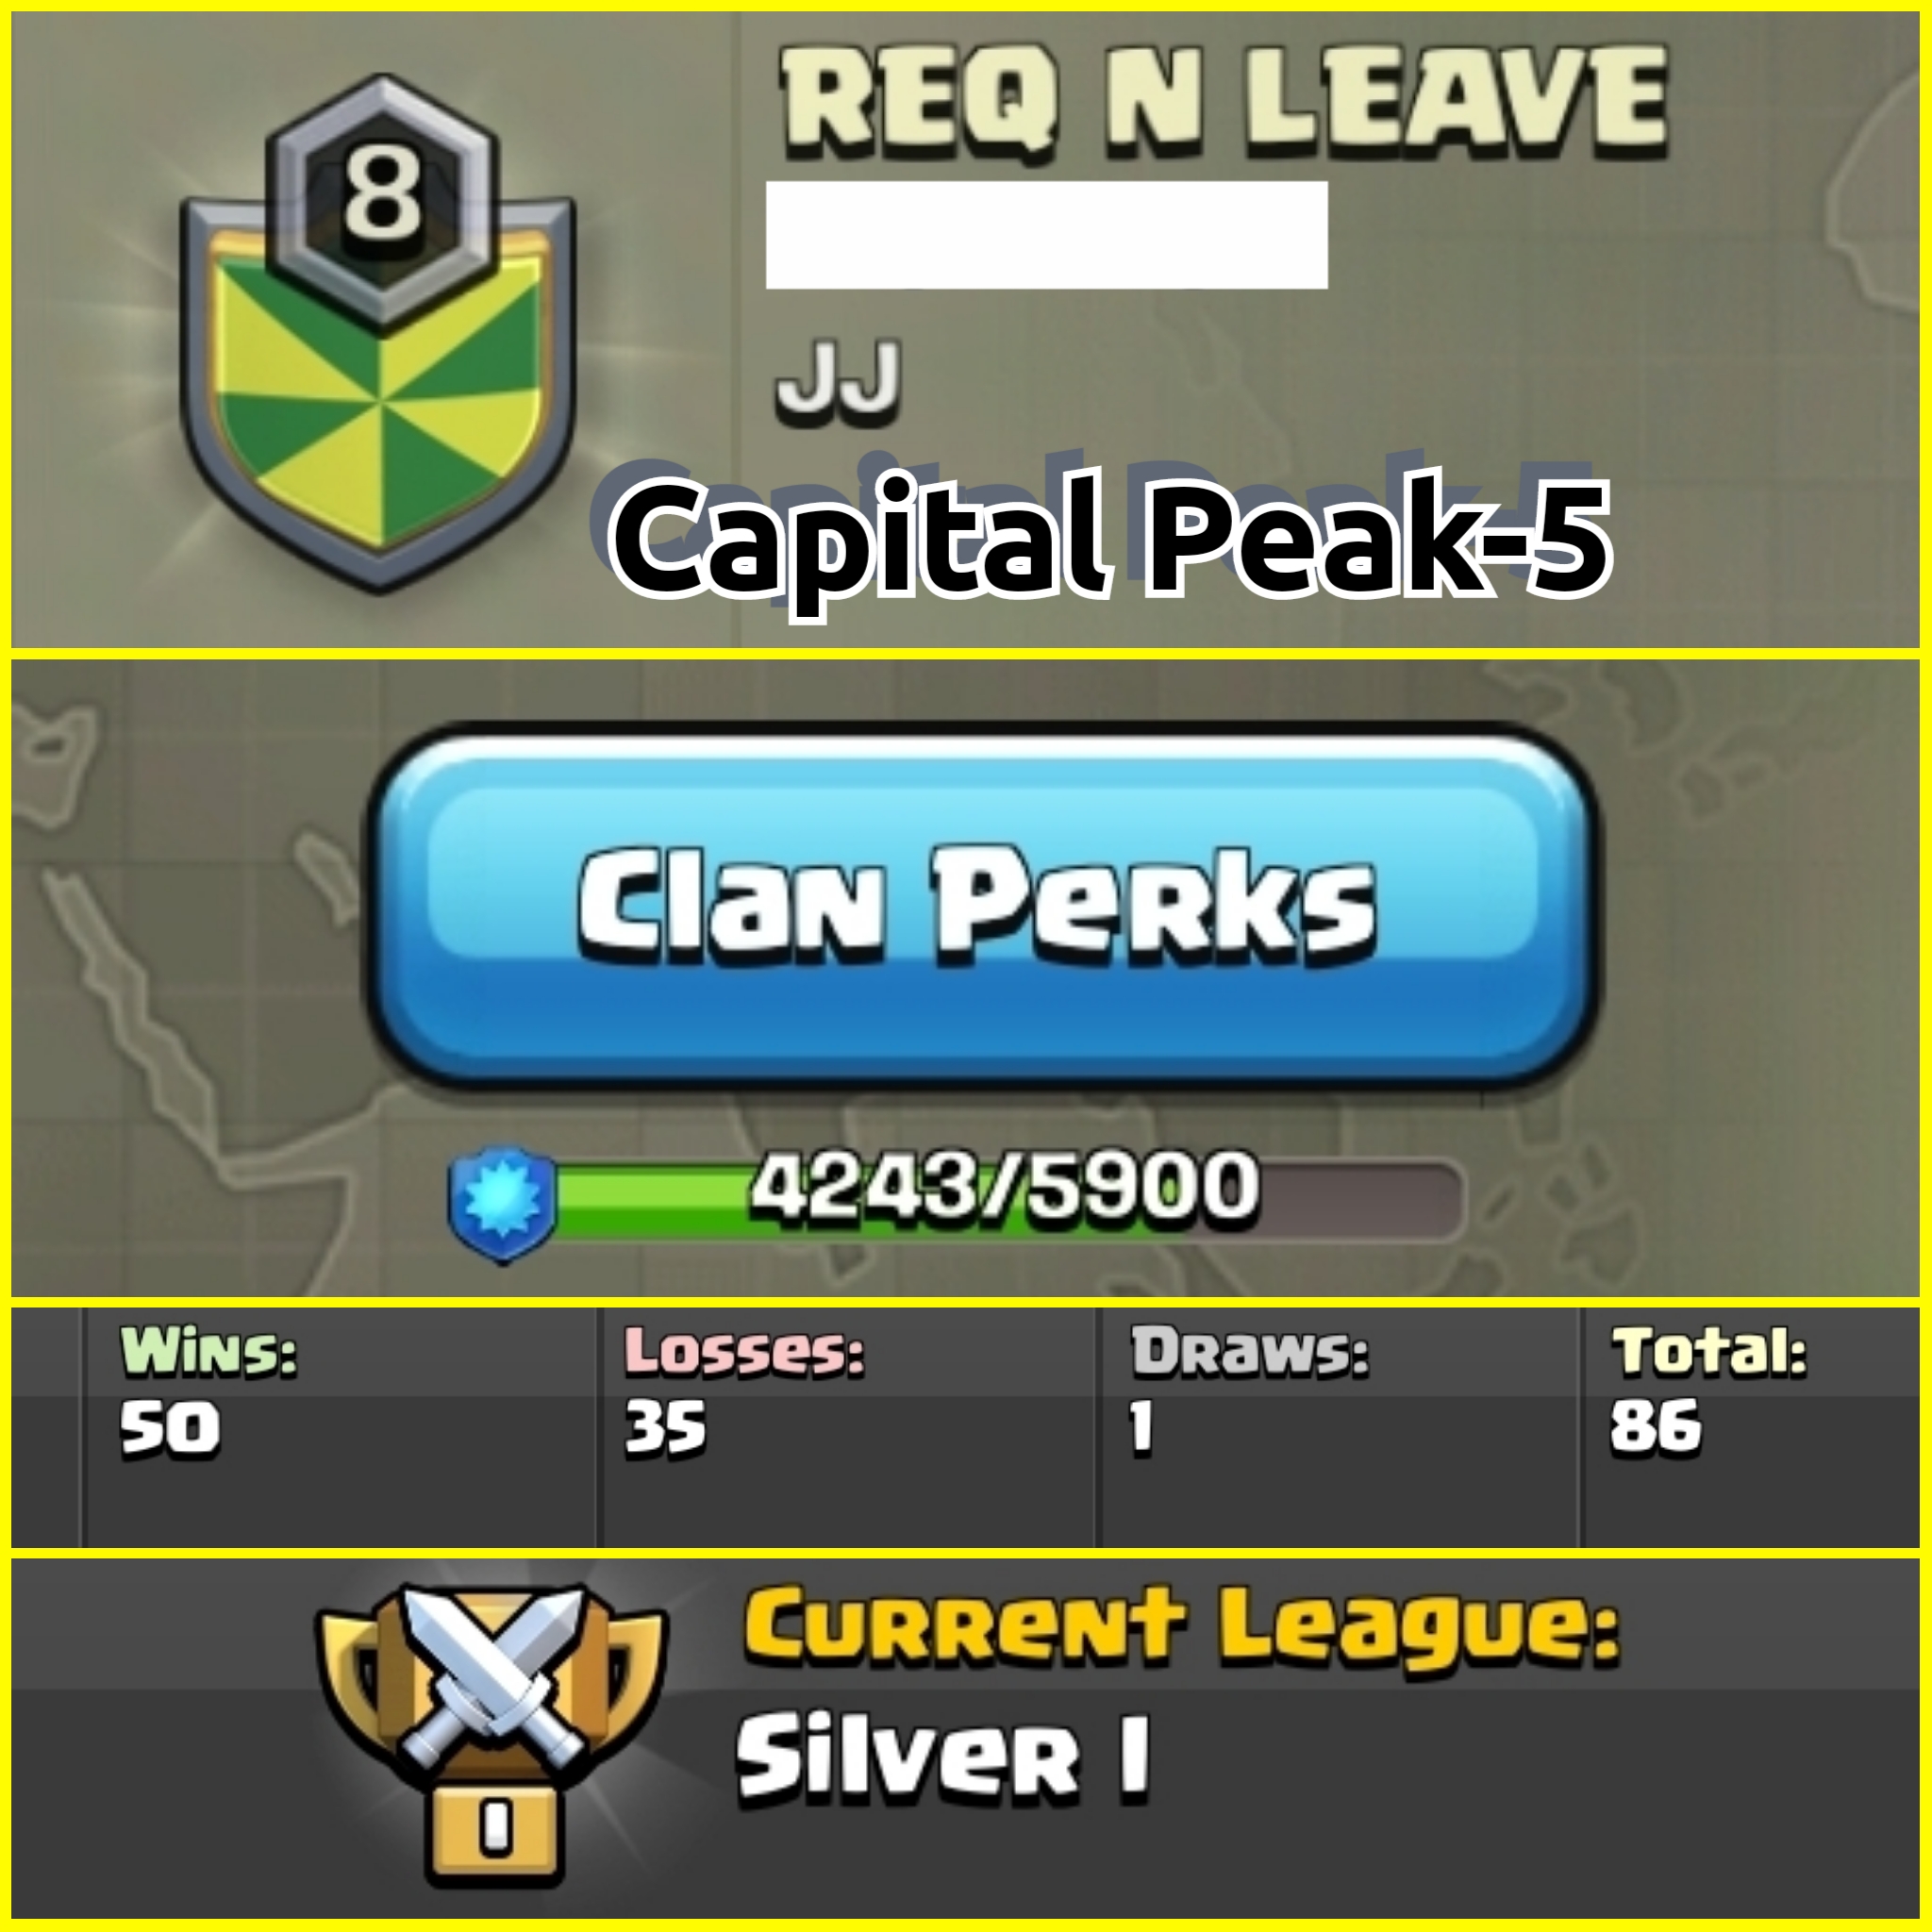 || Level - 8 || Name - REQ N LEAVE || Silver League 1 || Capital Peak 5 || Both Android and iOS || Fast Delivery ||